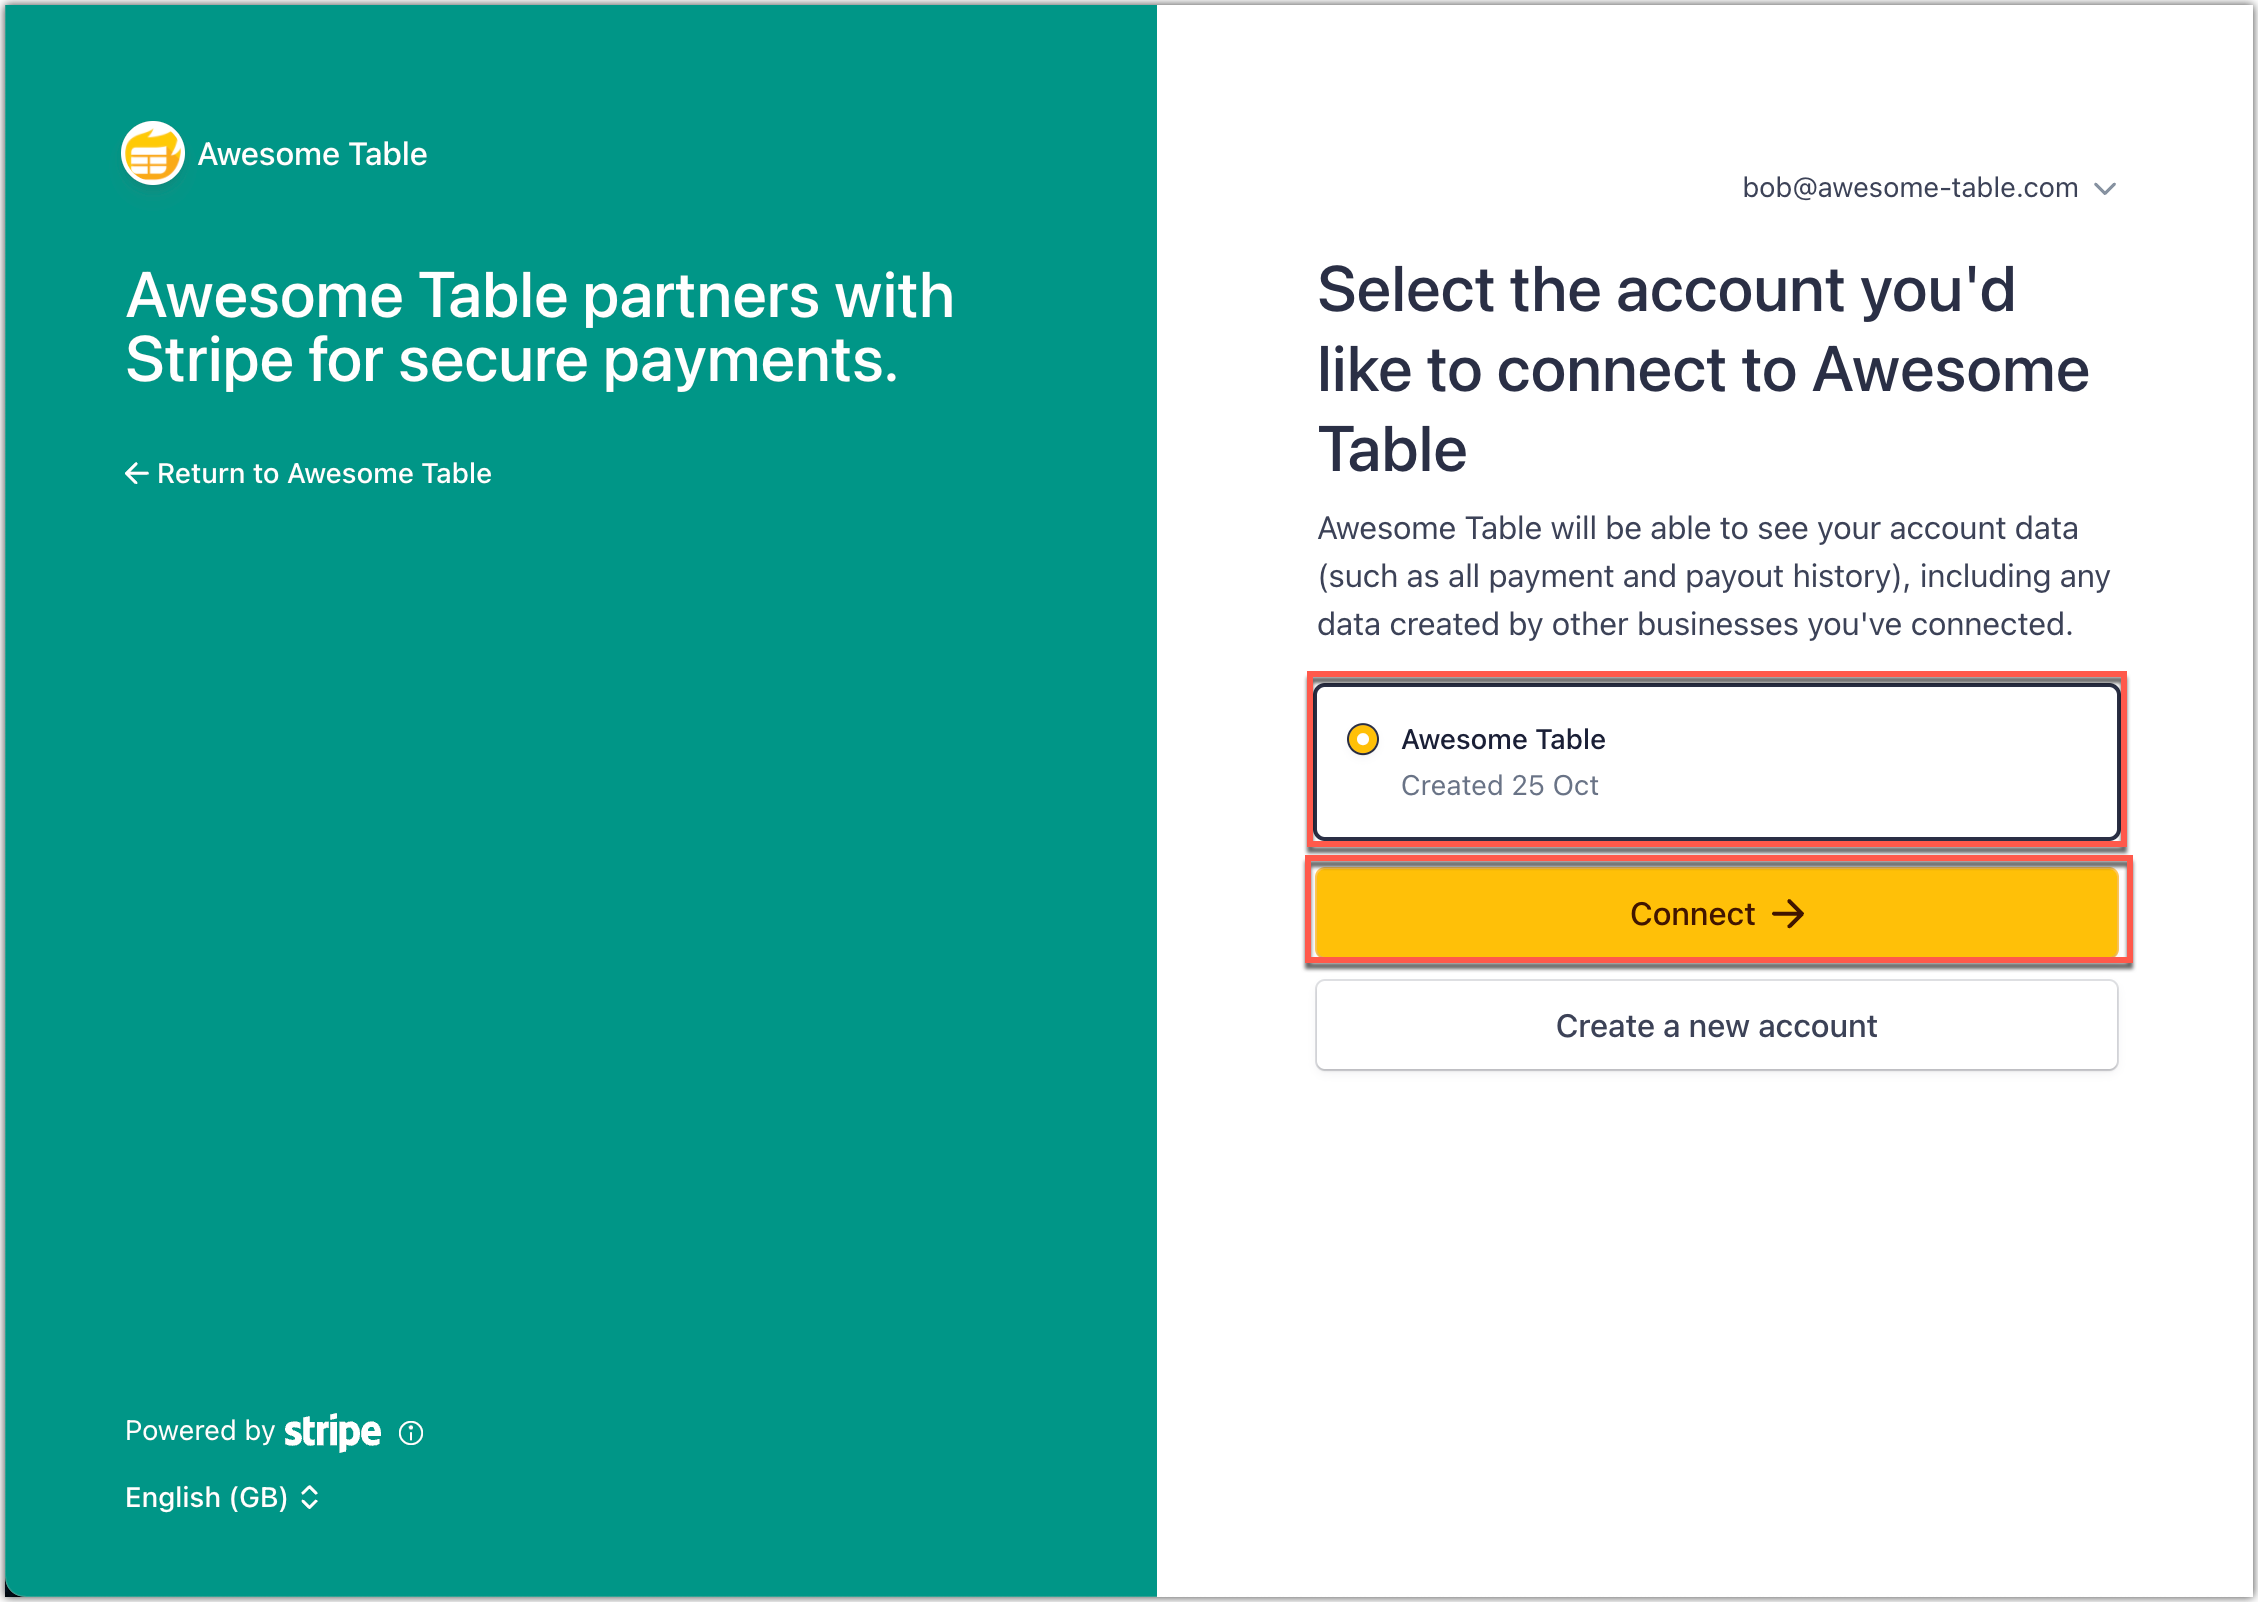 It allows Awesome Table Connectors to see your account data